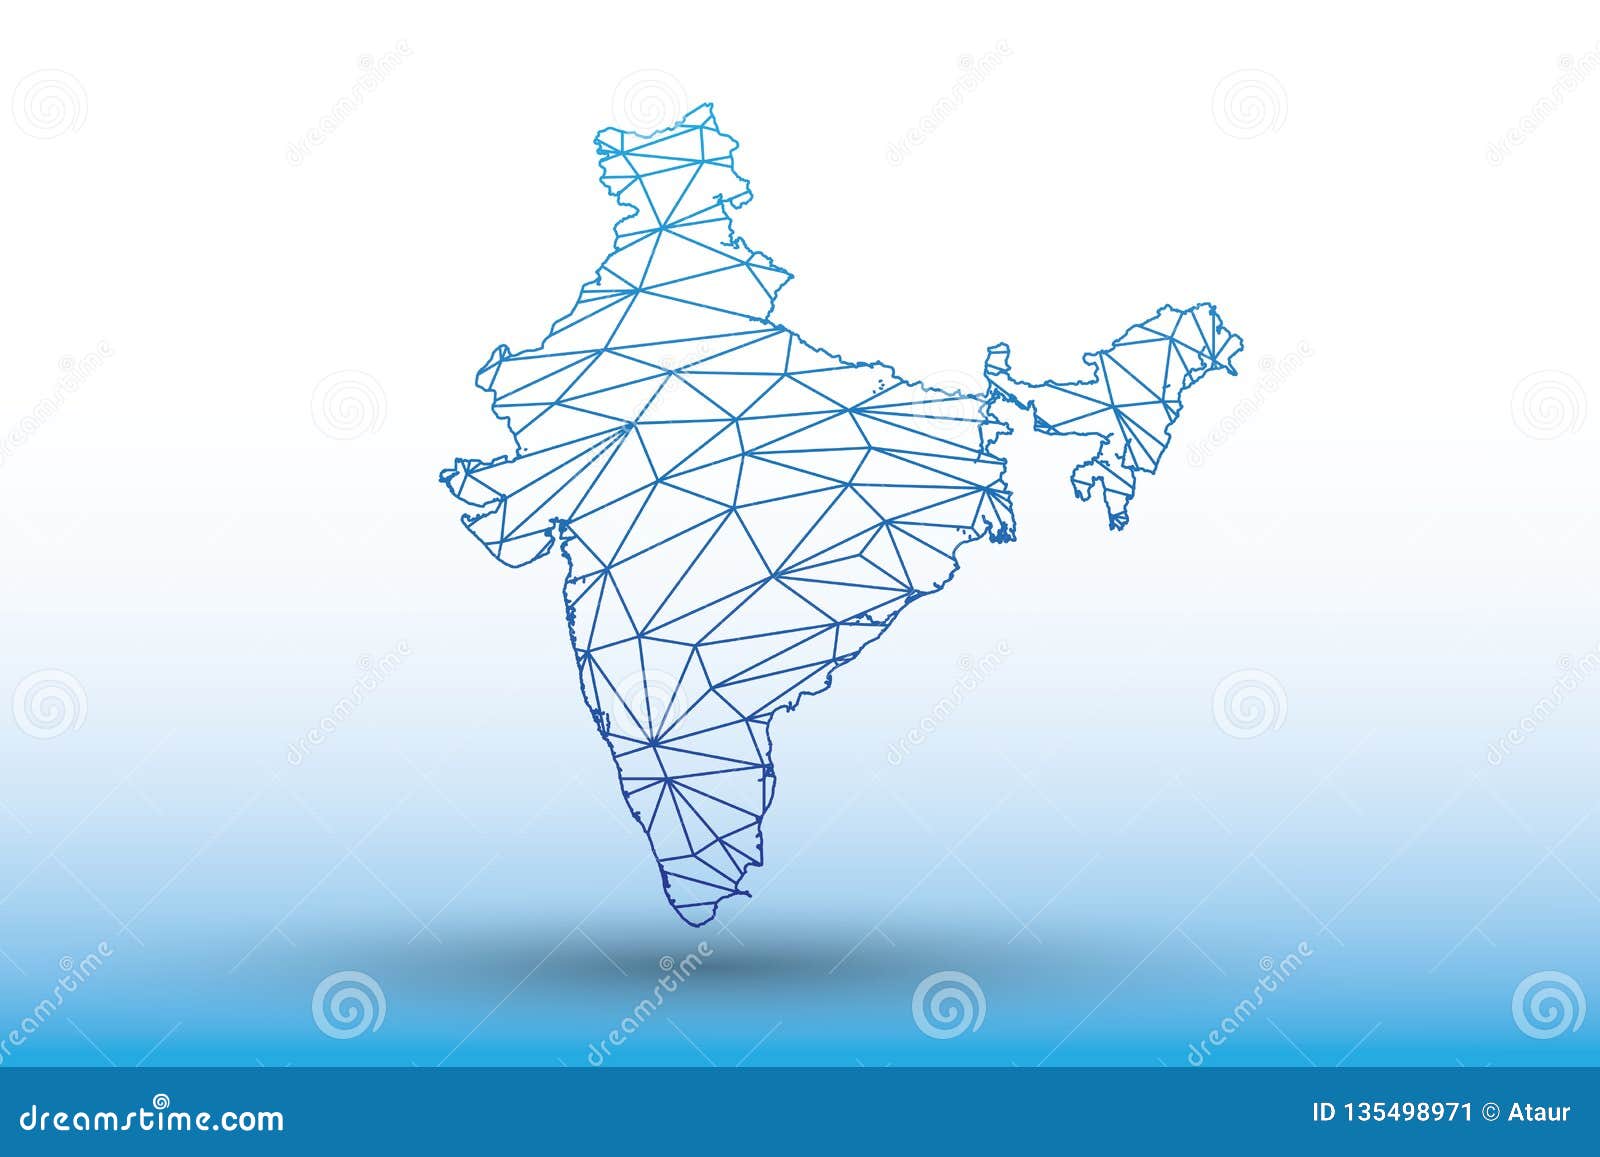 India Map Vector of Blue Color Geometric Connected Lines Using Triangles on  Light Background Illustration Meaning Network Stock Vector - Illustration  of concept, graphic: 135498971